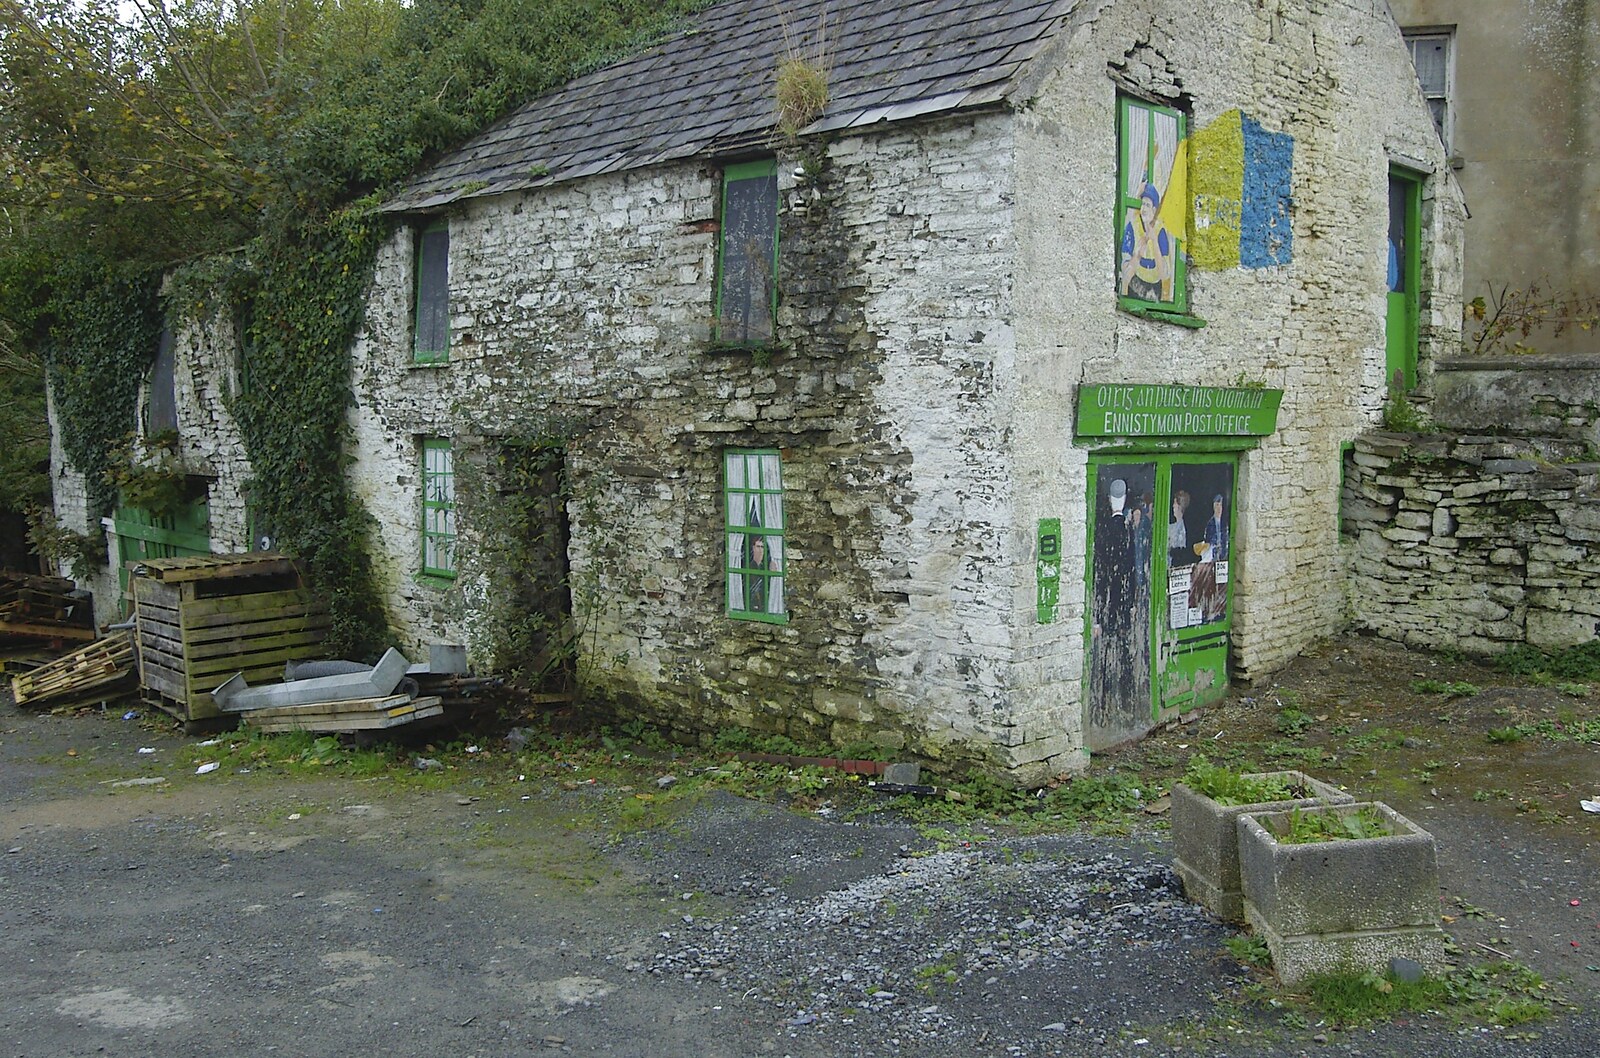 The quaint, but abandoned, Ennistymon Post Office from Corofin, Ennistymon and The Burran, County Clare, Western Ireland - 27th October 2006